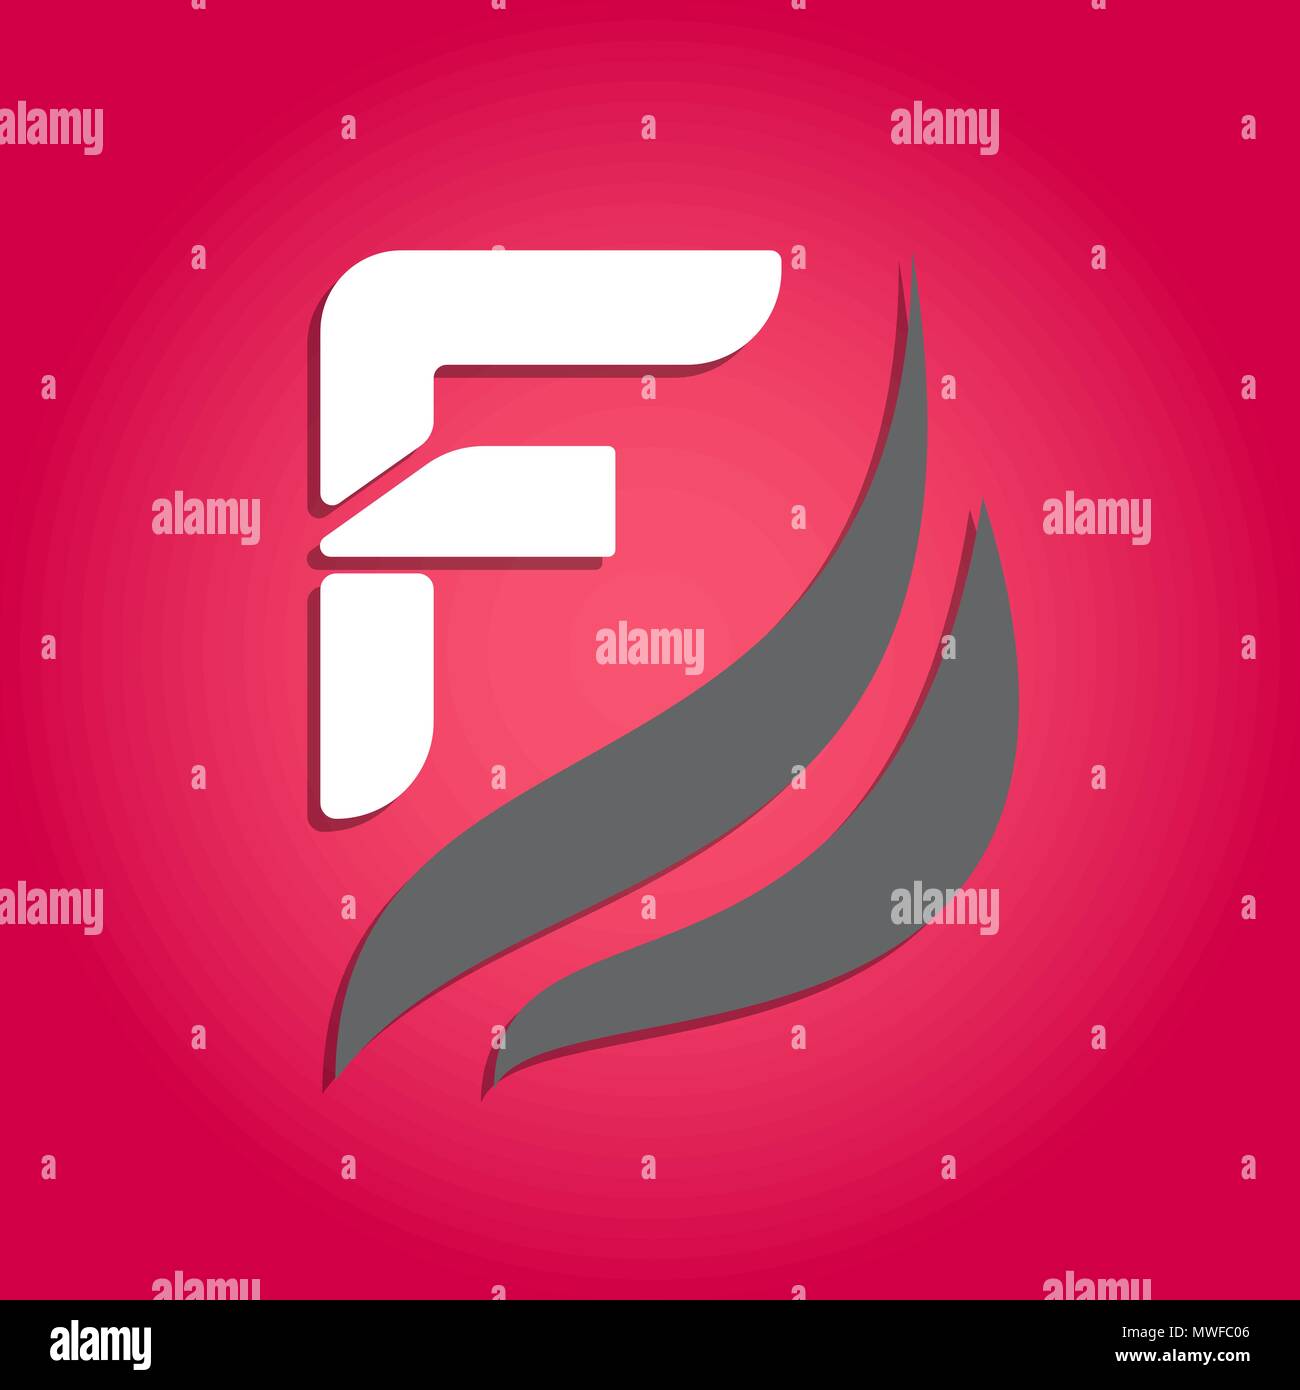 F - capital letter abstract logo design Stock Vector